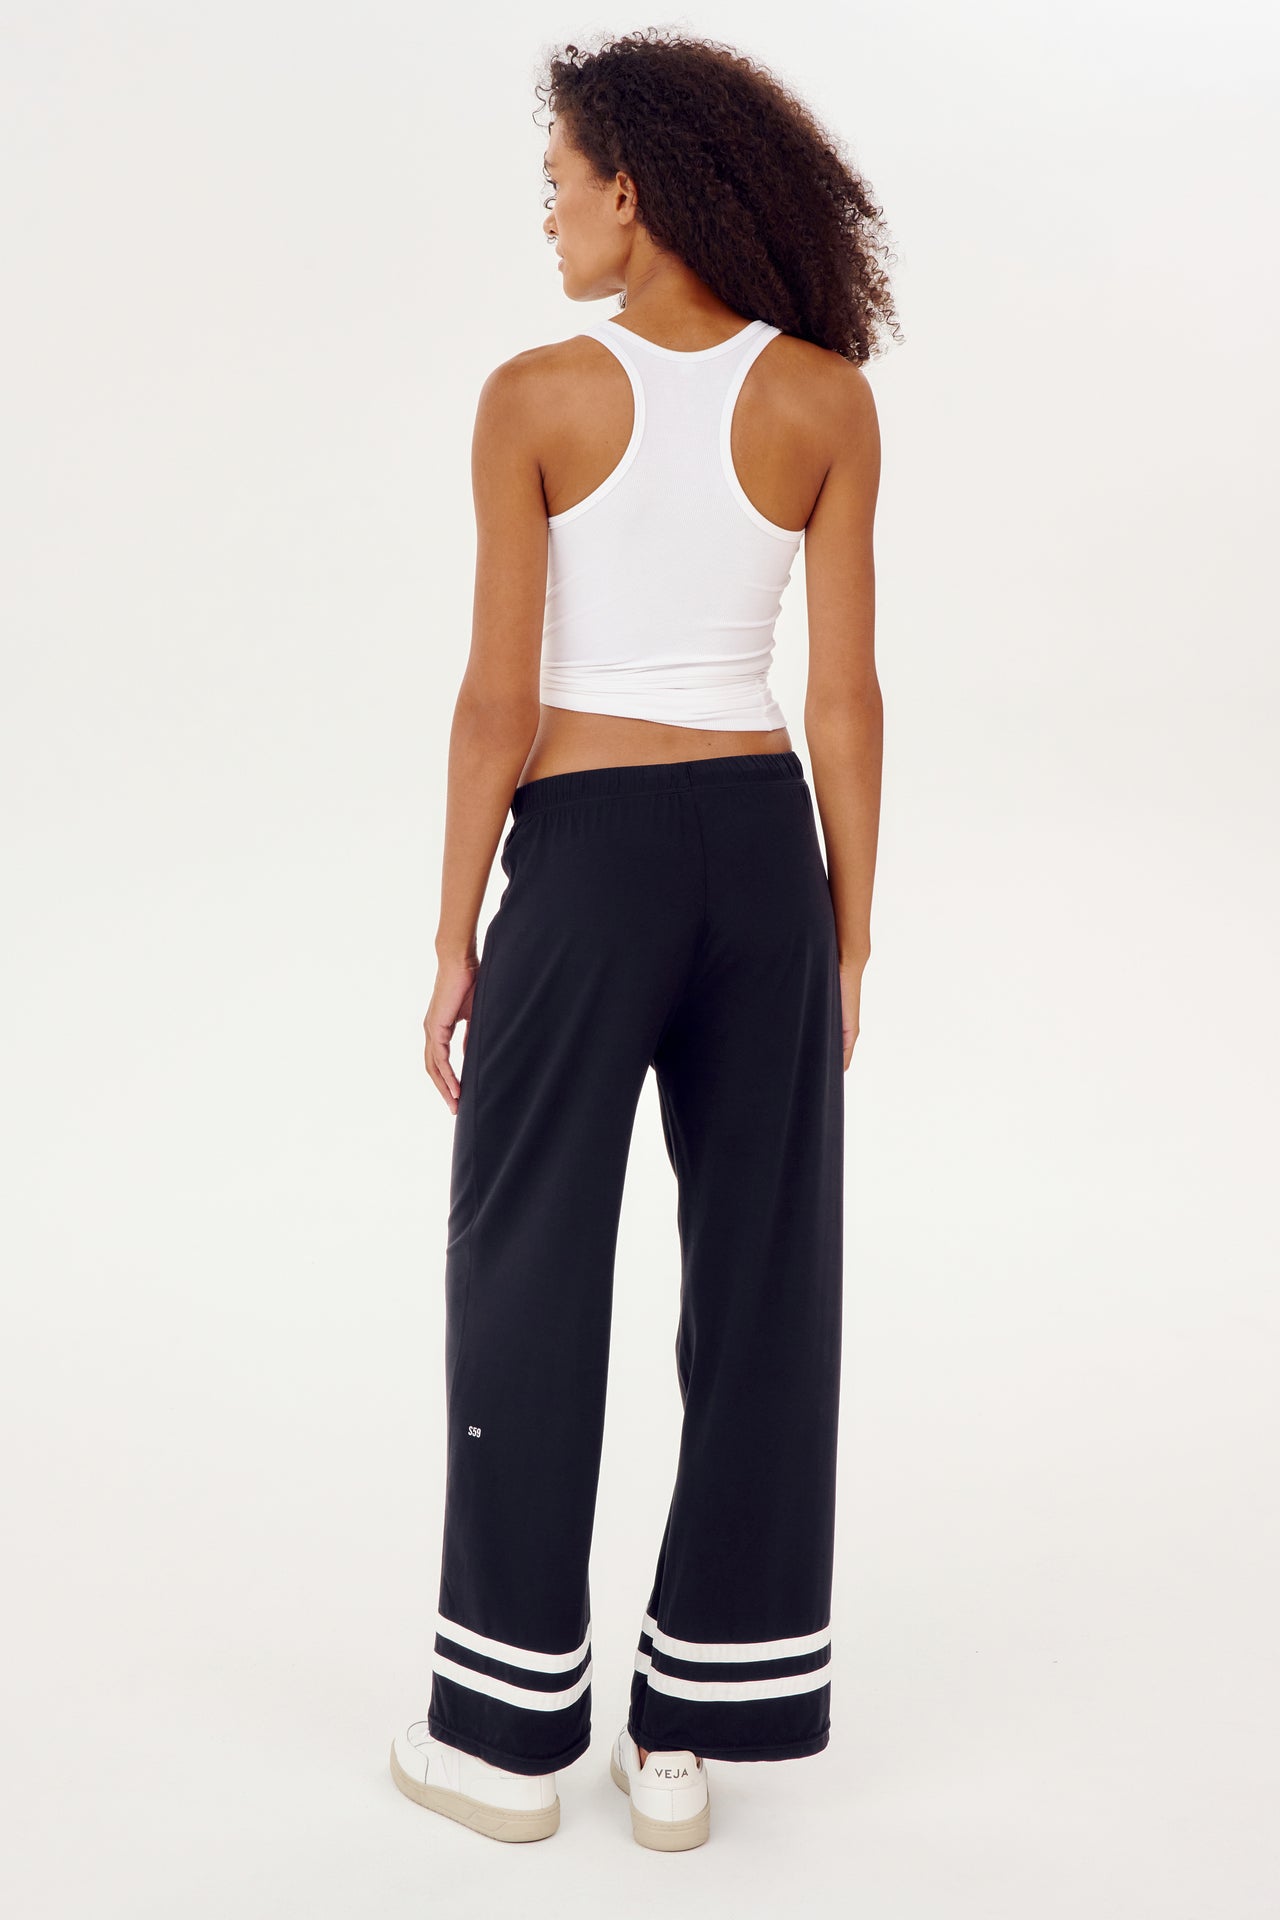 The back view of a woman wearing black and white SPLITS59 Quinn Airweight Wide Leg Pants, designed for comfort and workout.